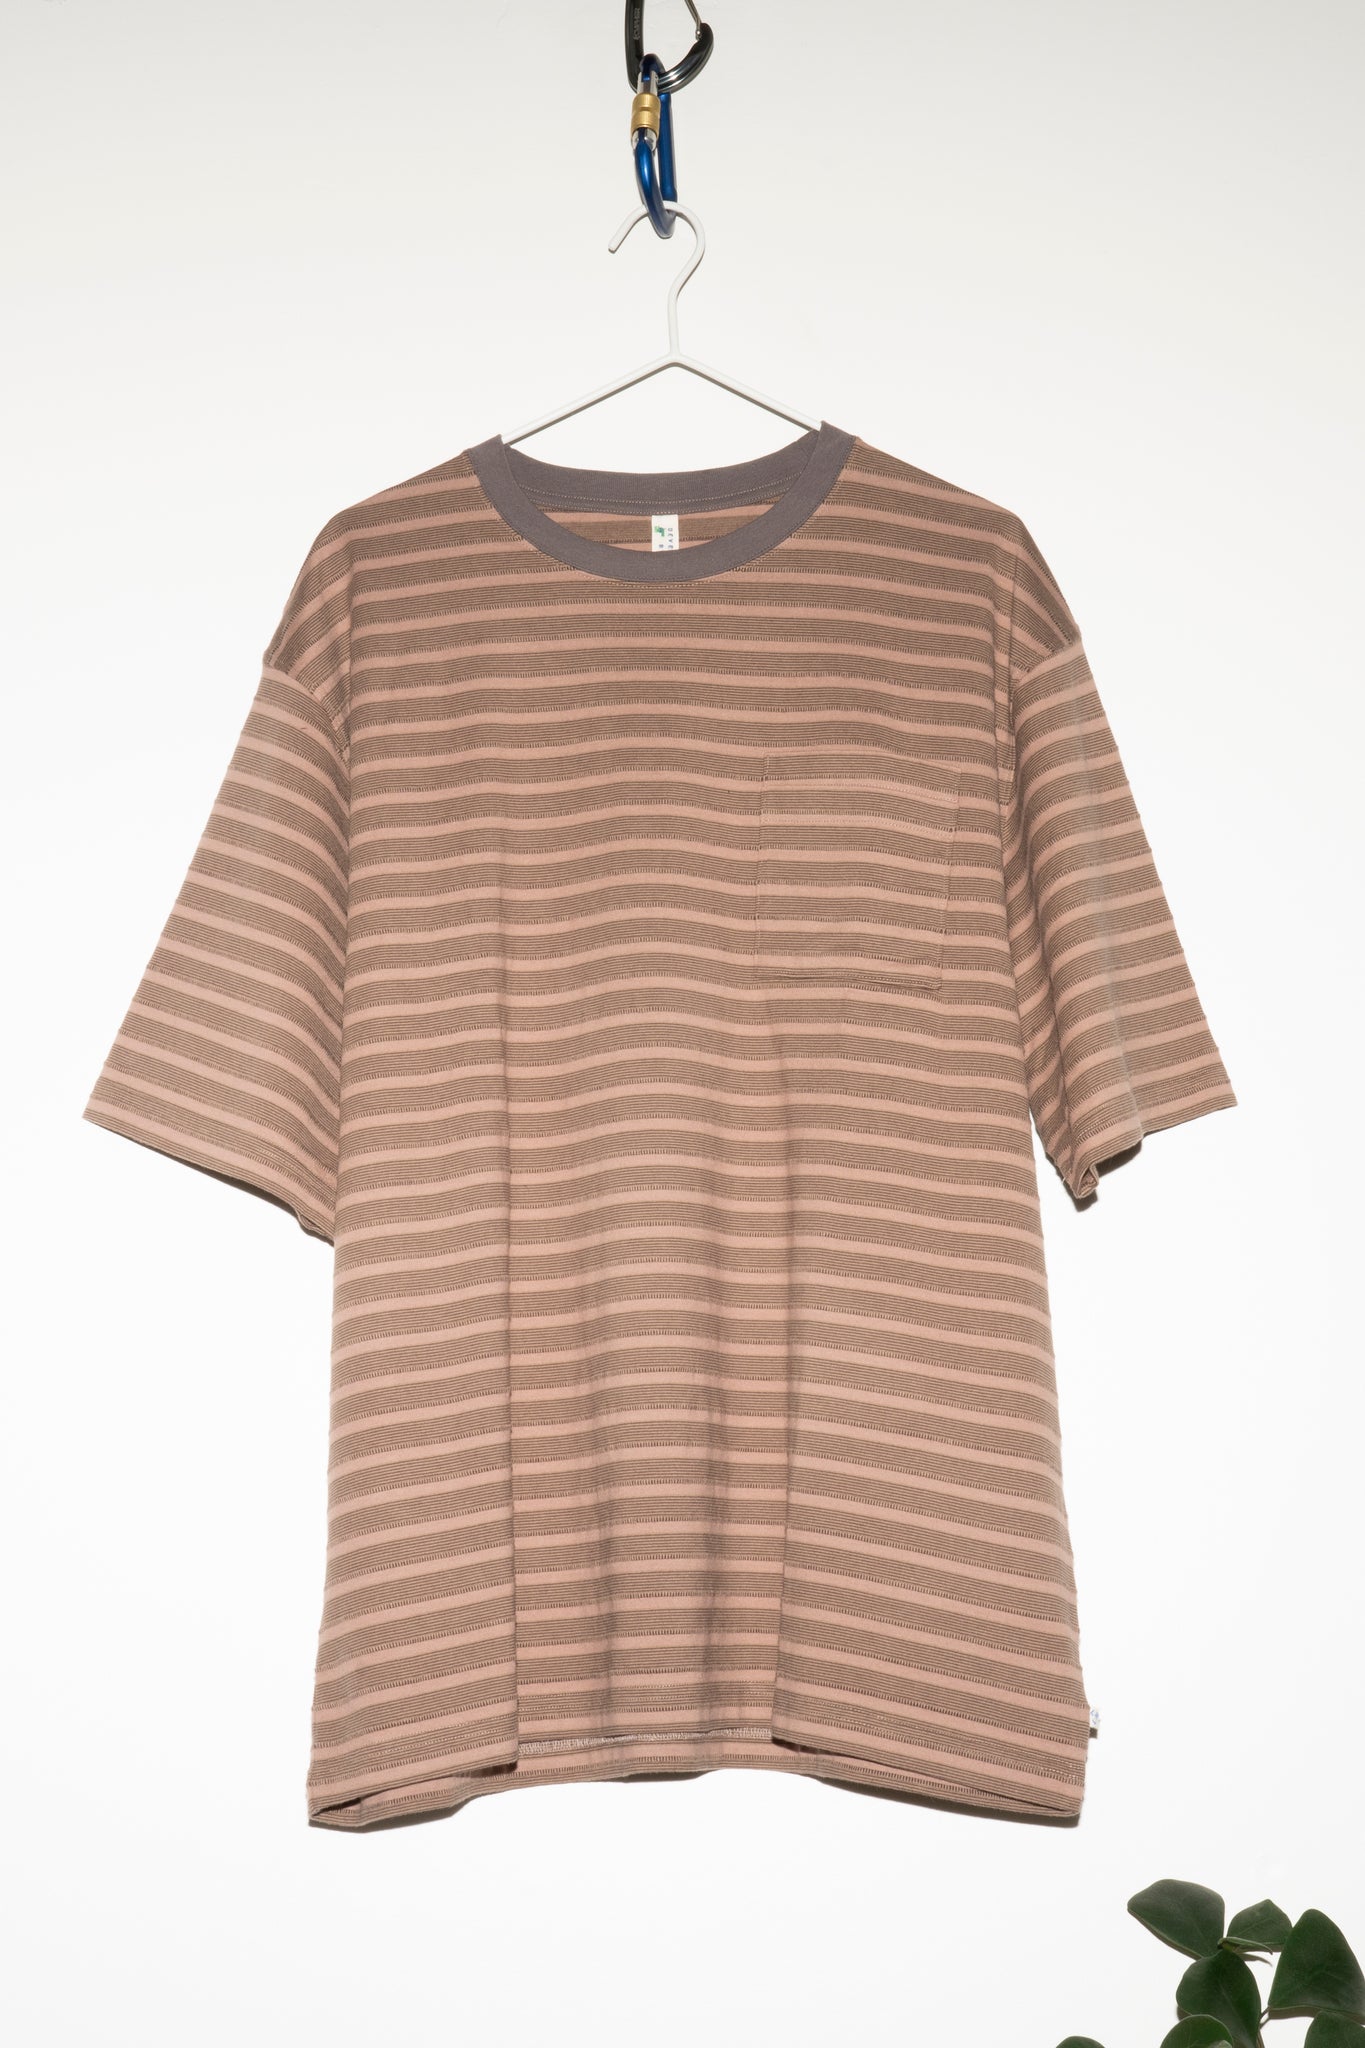 DEVELOPMENT BY NOROLL - UNEVENNESS S/S TEE IN SOIL BROWN